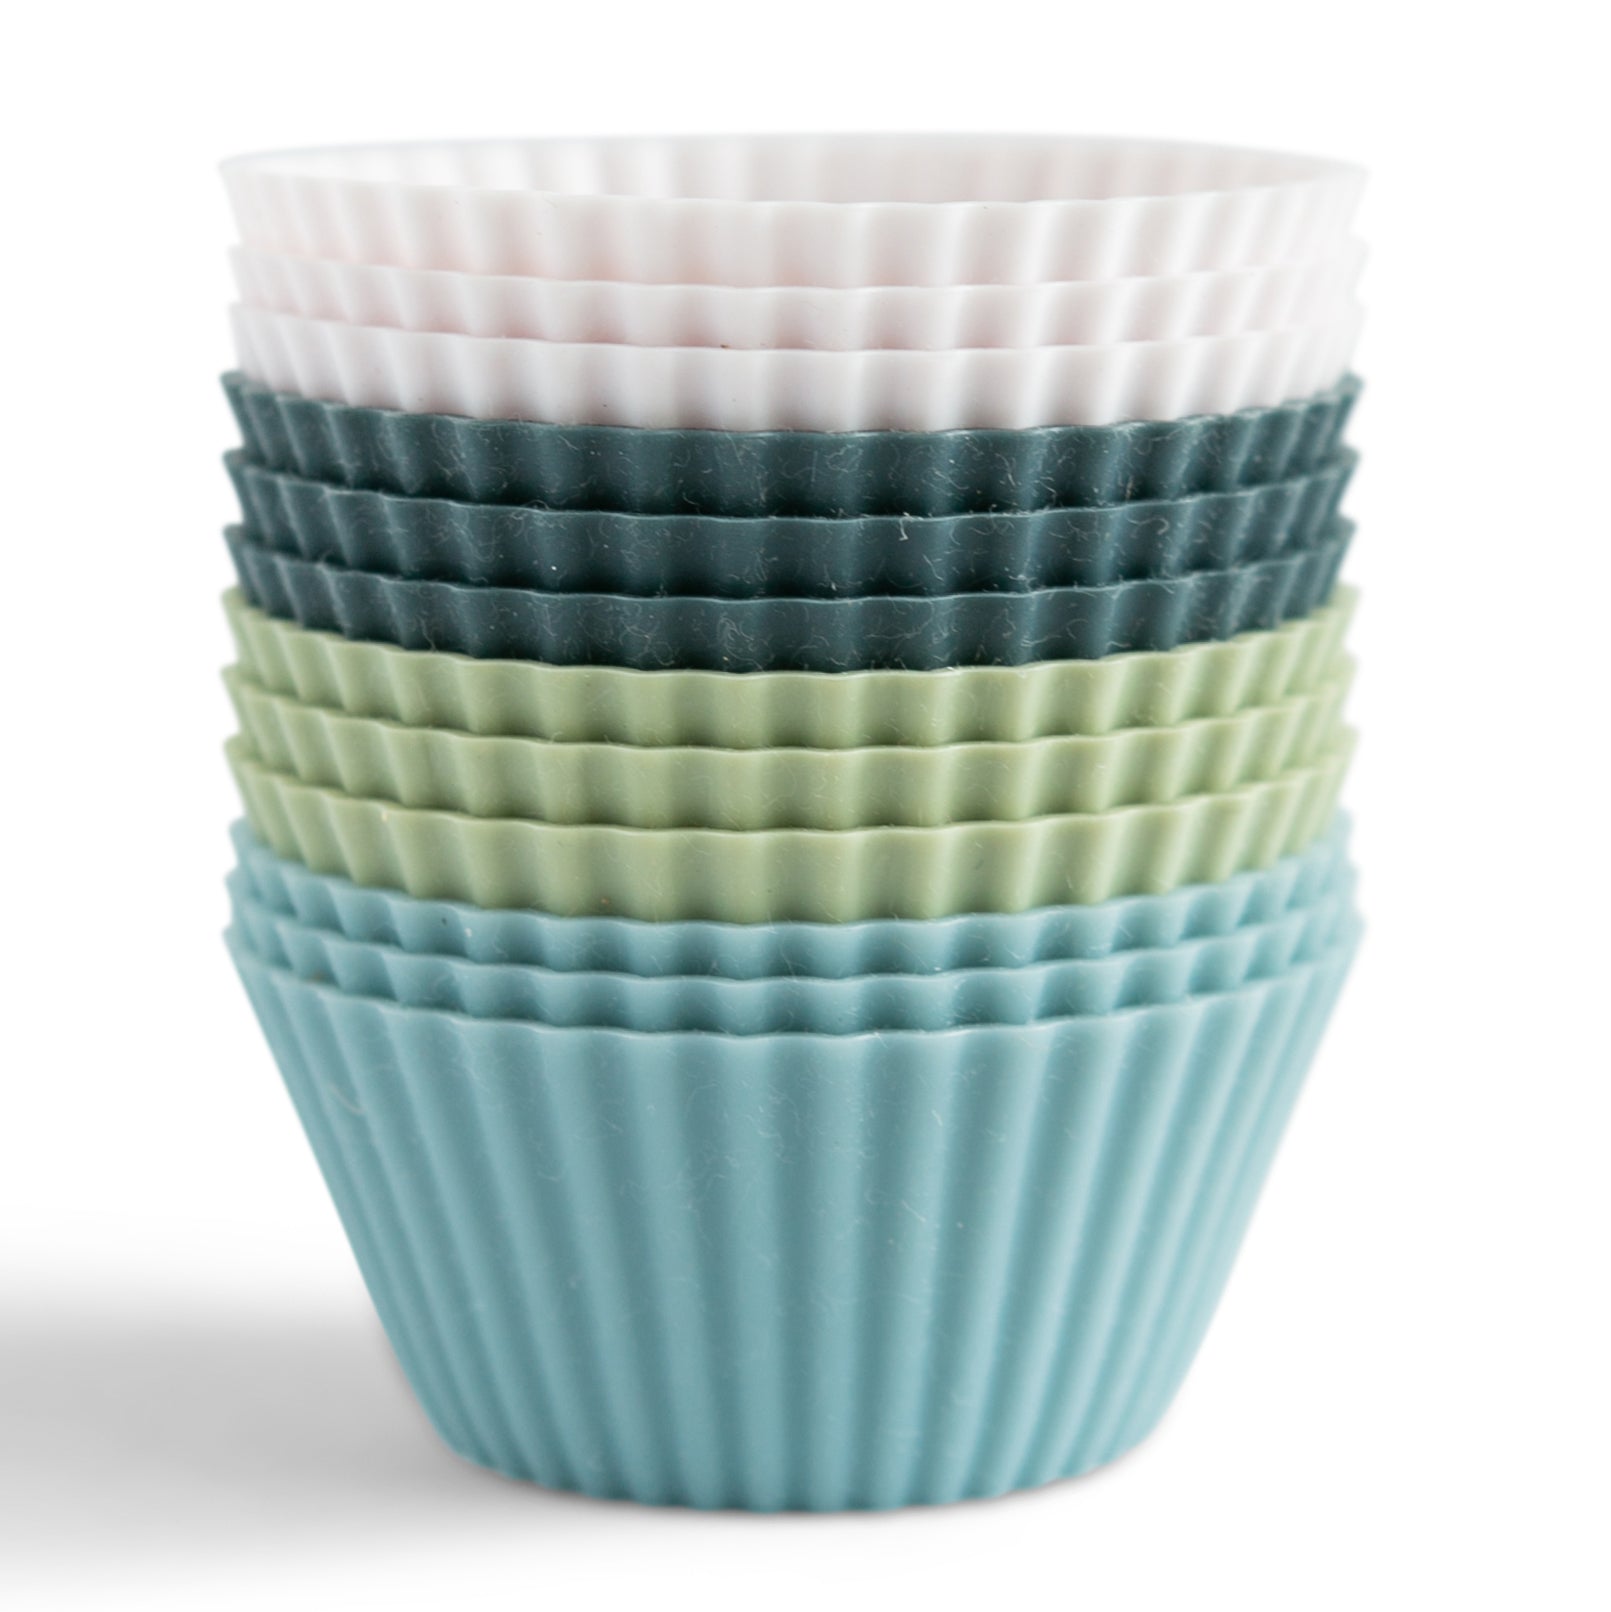 Silicone Baking Cups, The Signature Collection